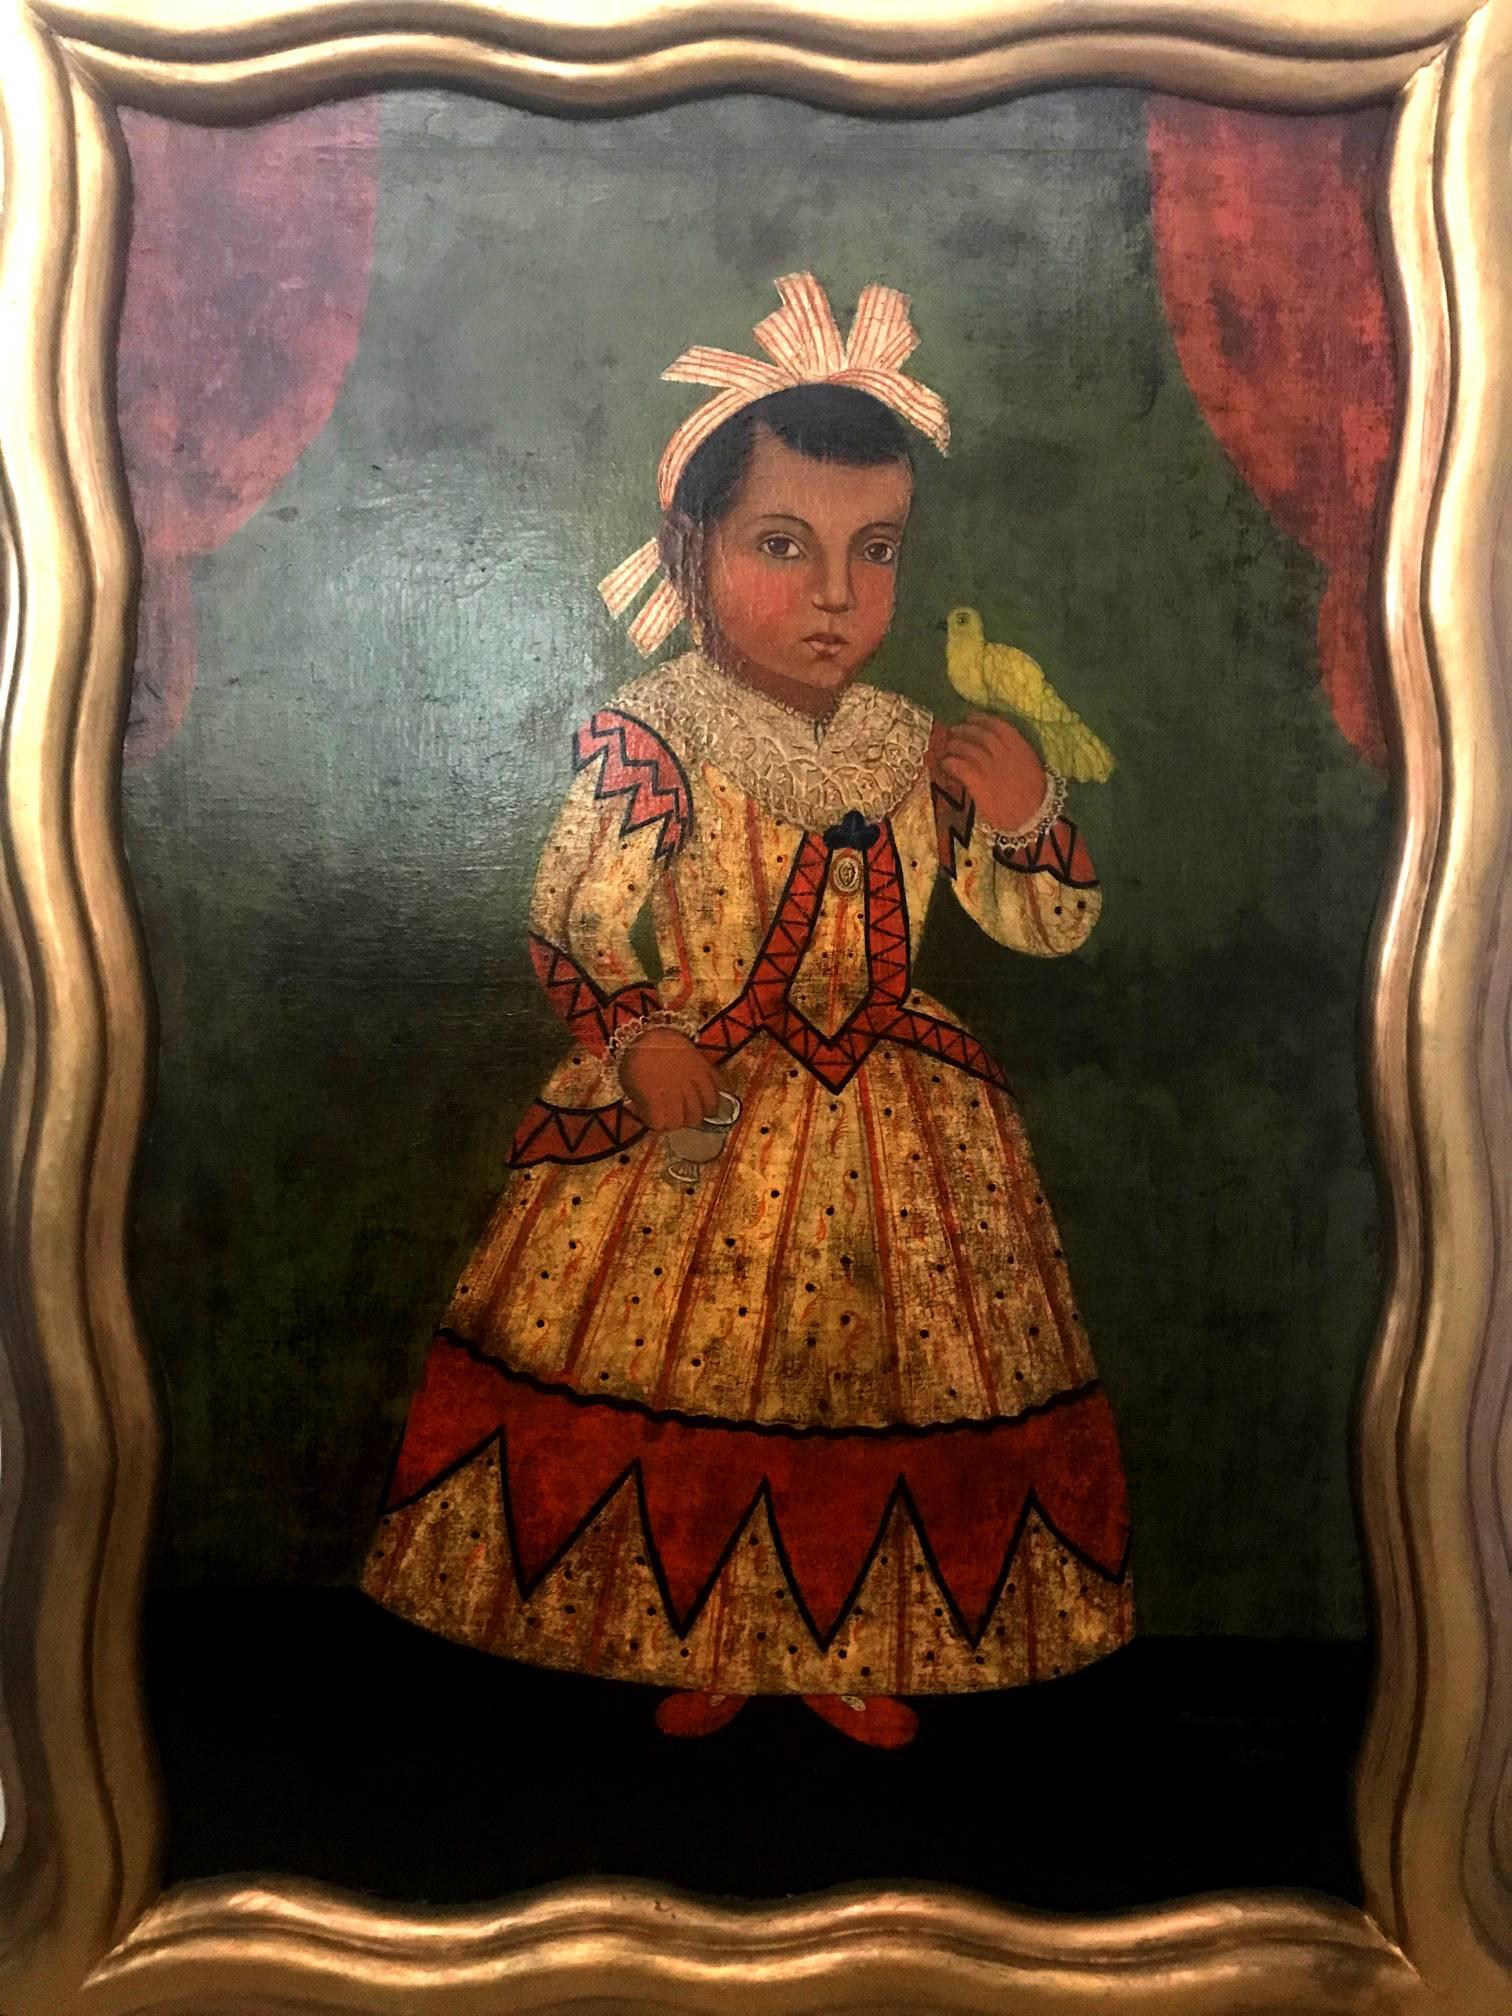 An antique oil painting depicting a Mexican girl dressed in Indian costume holding a bird, standing between a pair of curtains, circa 1860s. Probably painted by an itinerant painter Rafael Flores, the painting was relined and re-stretched at some